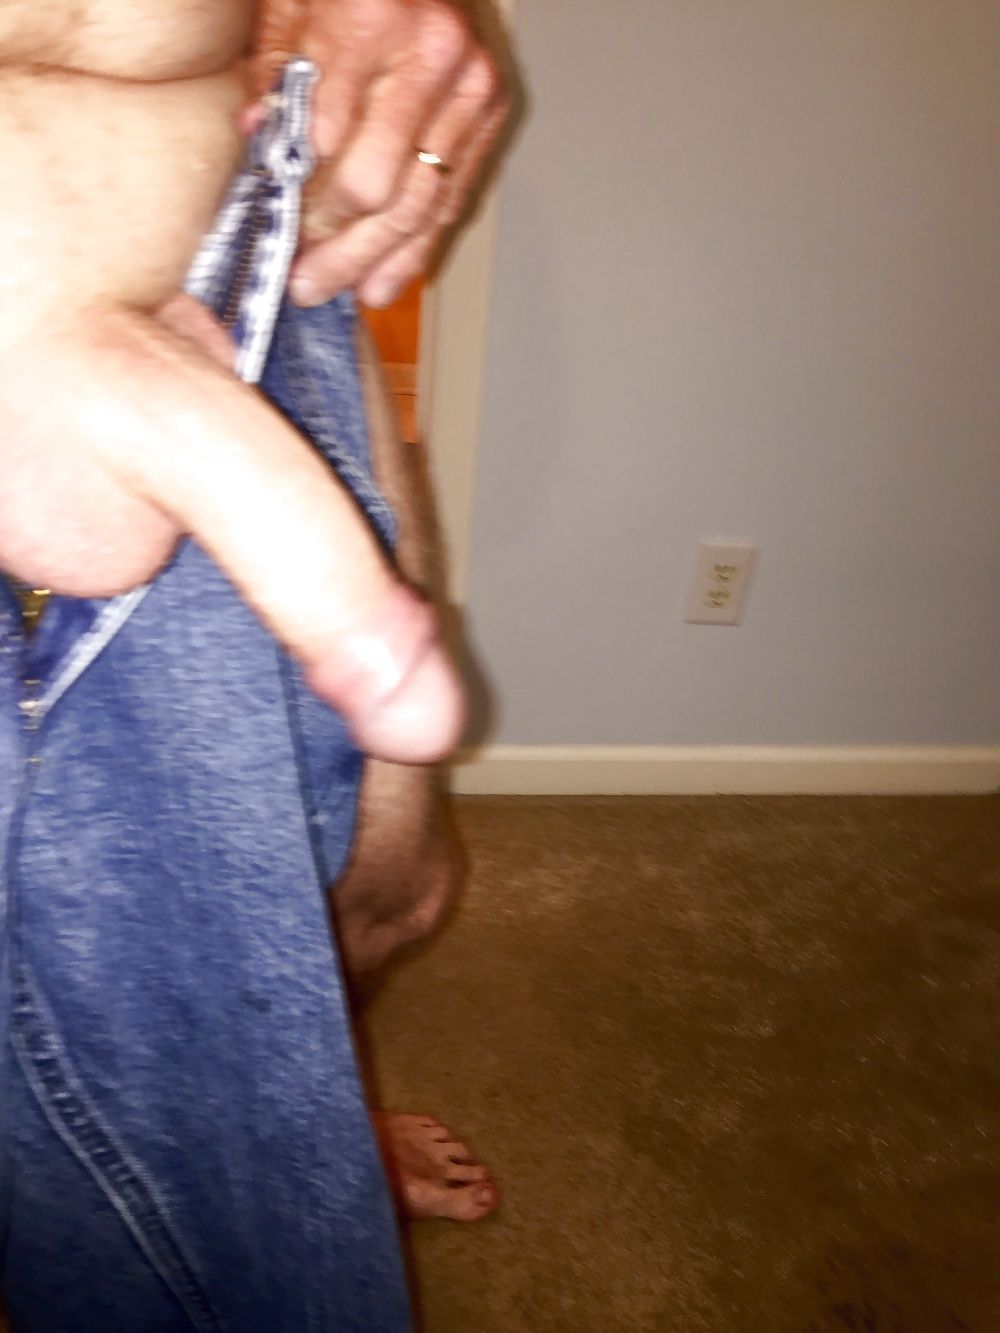 Stuffing cock into jeans  #14